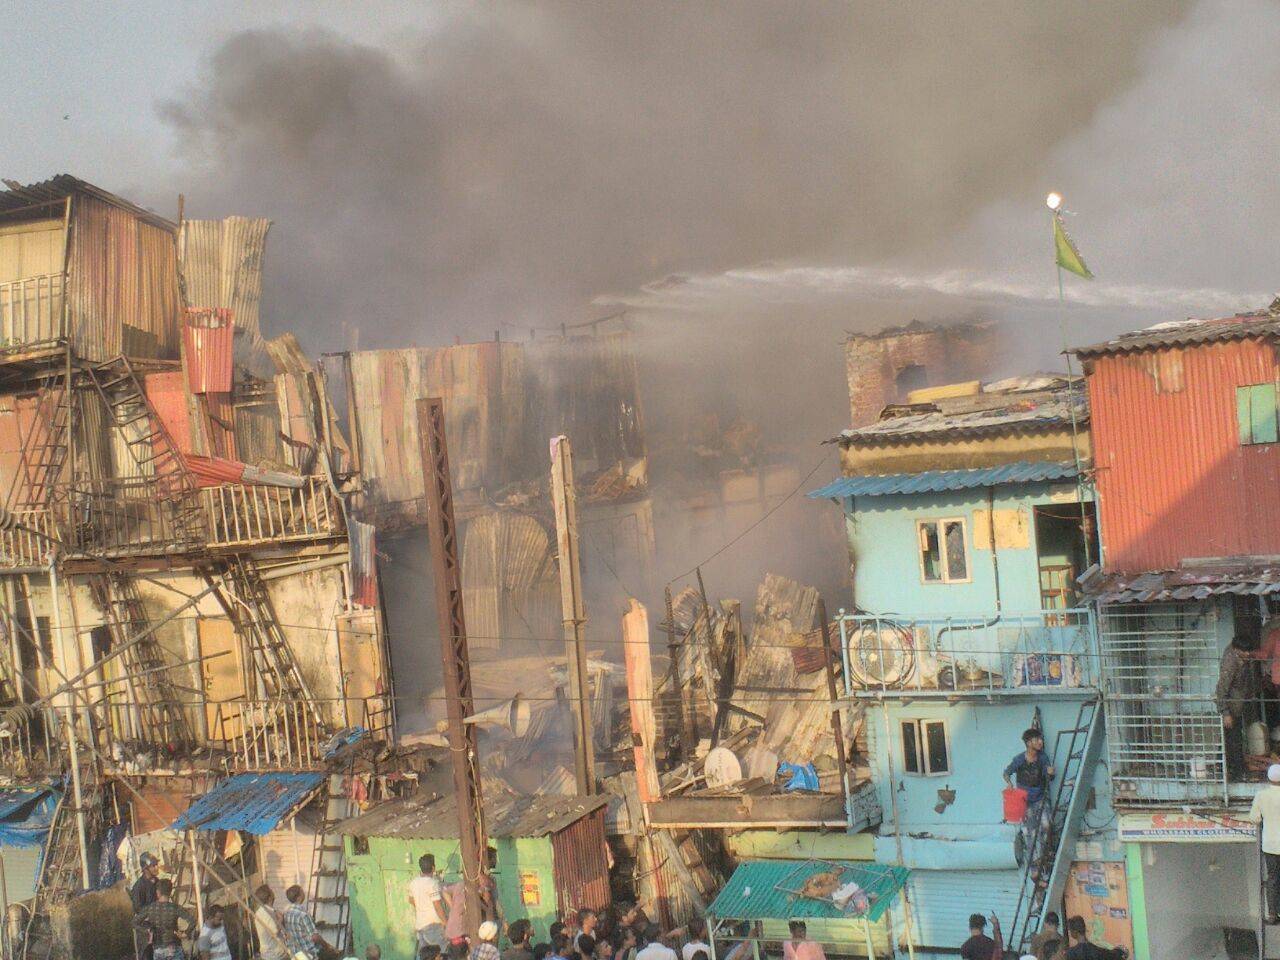 The fire engulfed around 300 hutments and left three firemen injured.